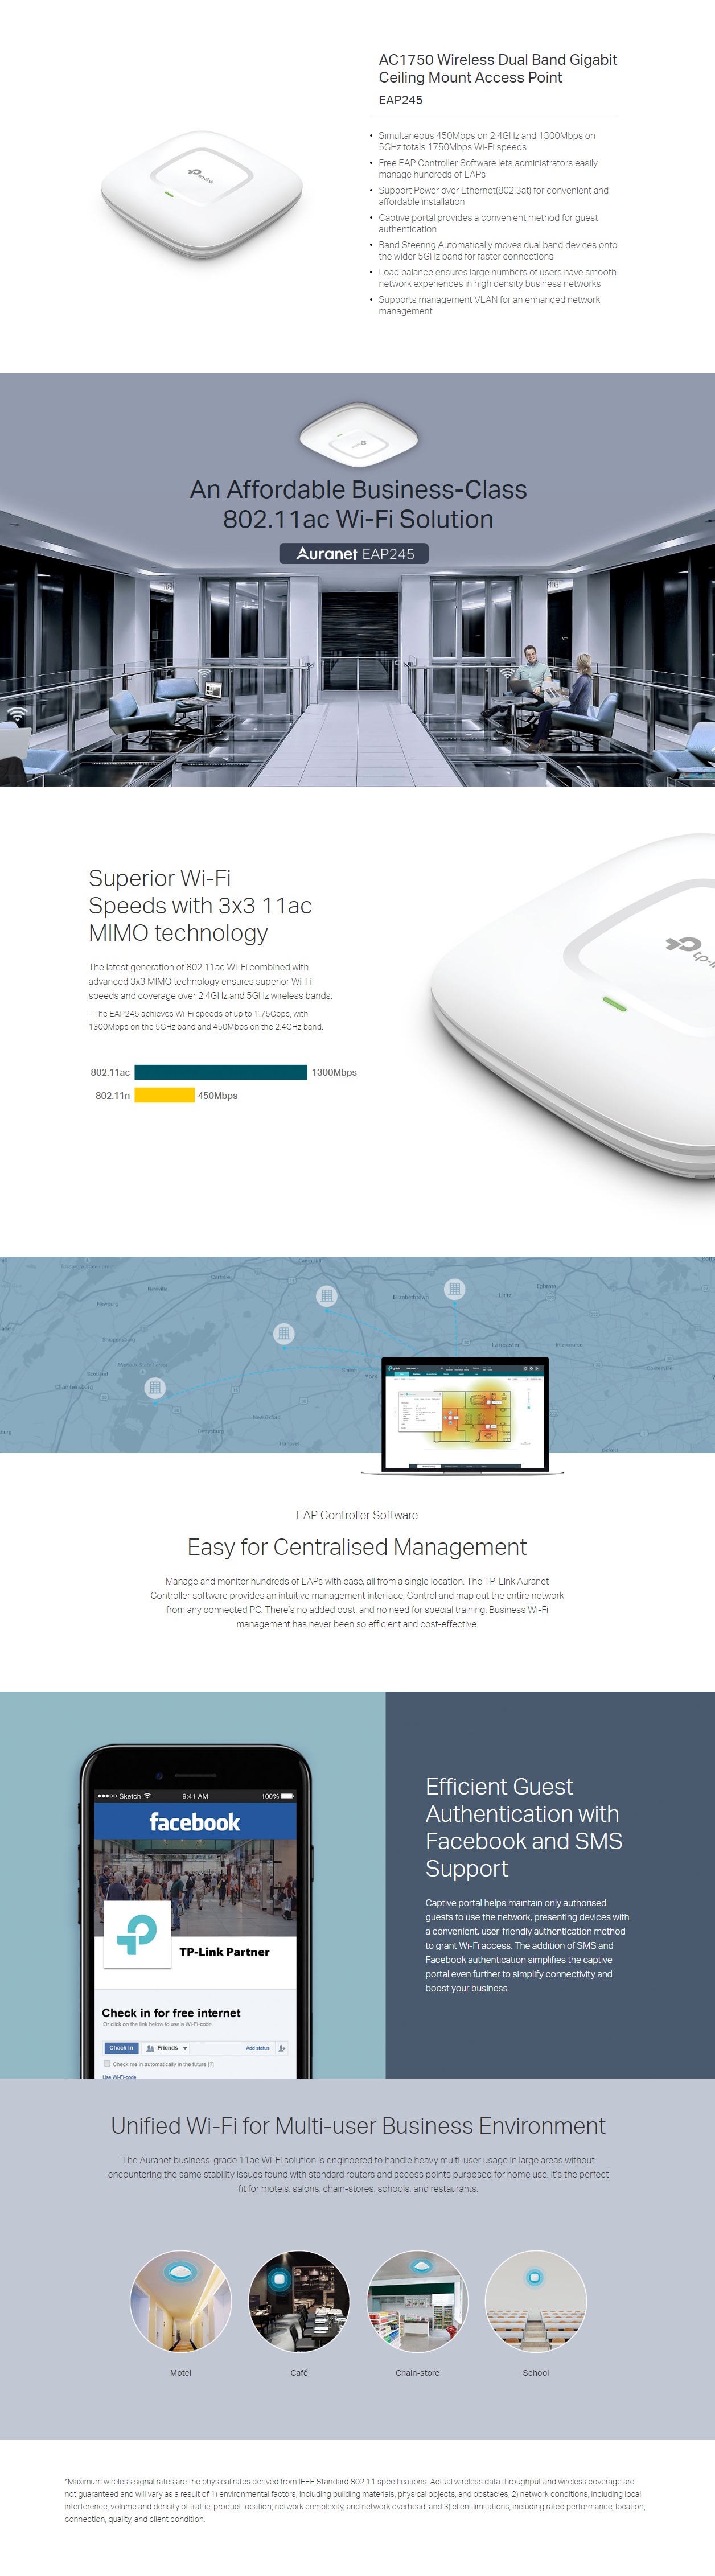  Access Point : 1750Mbps Wireless Dual Band Gigabit Ceiling Mount Access Point  